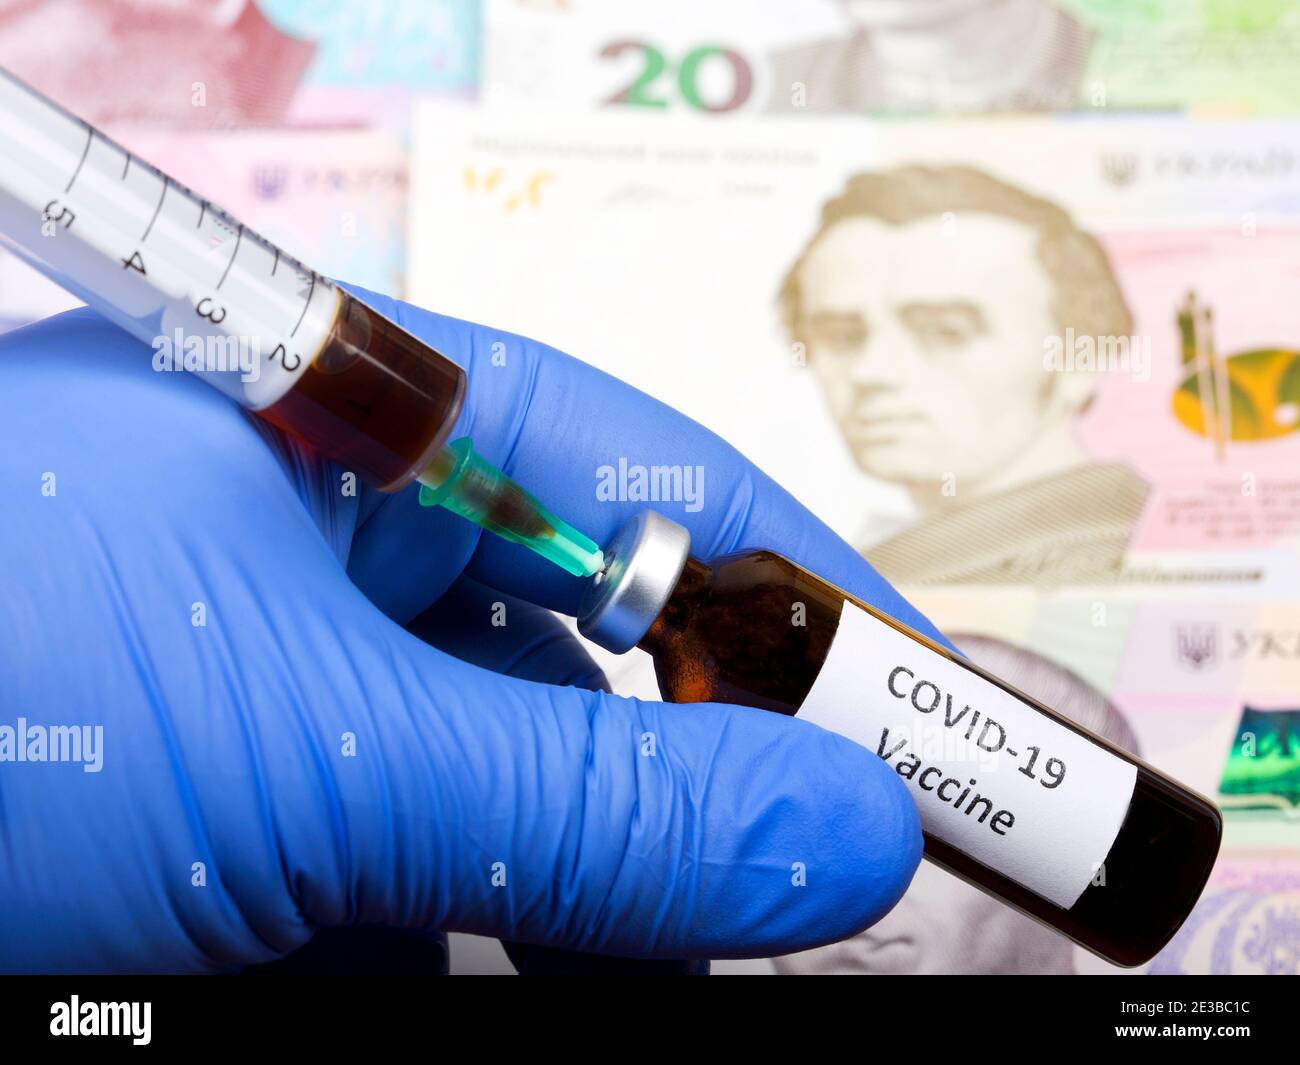 Vaccine against Covid-19 on the background of Ukrainian money Stock Photo